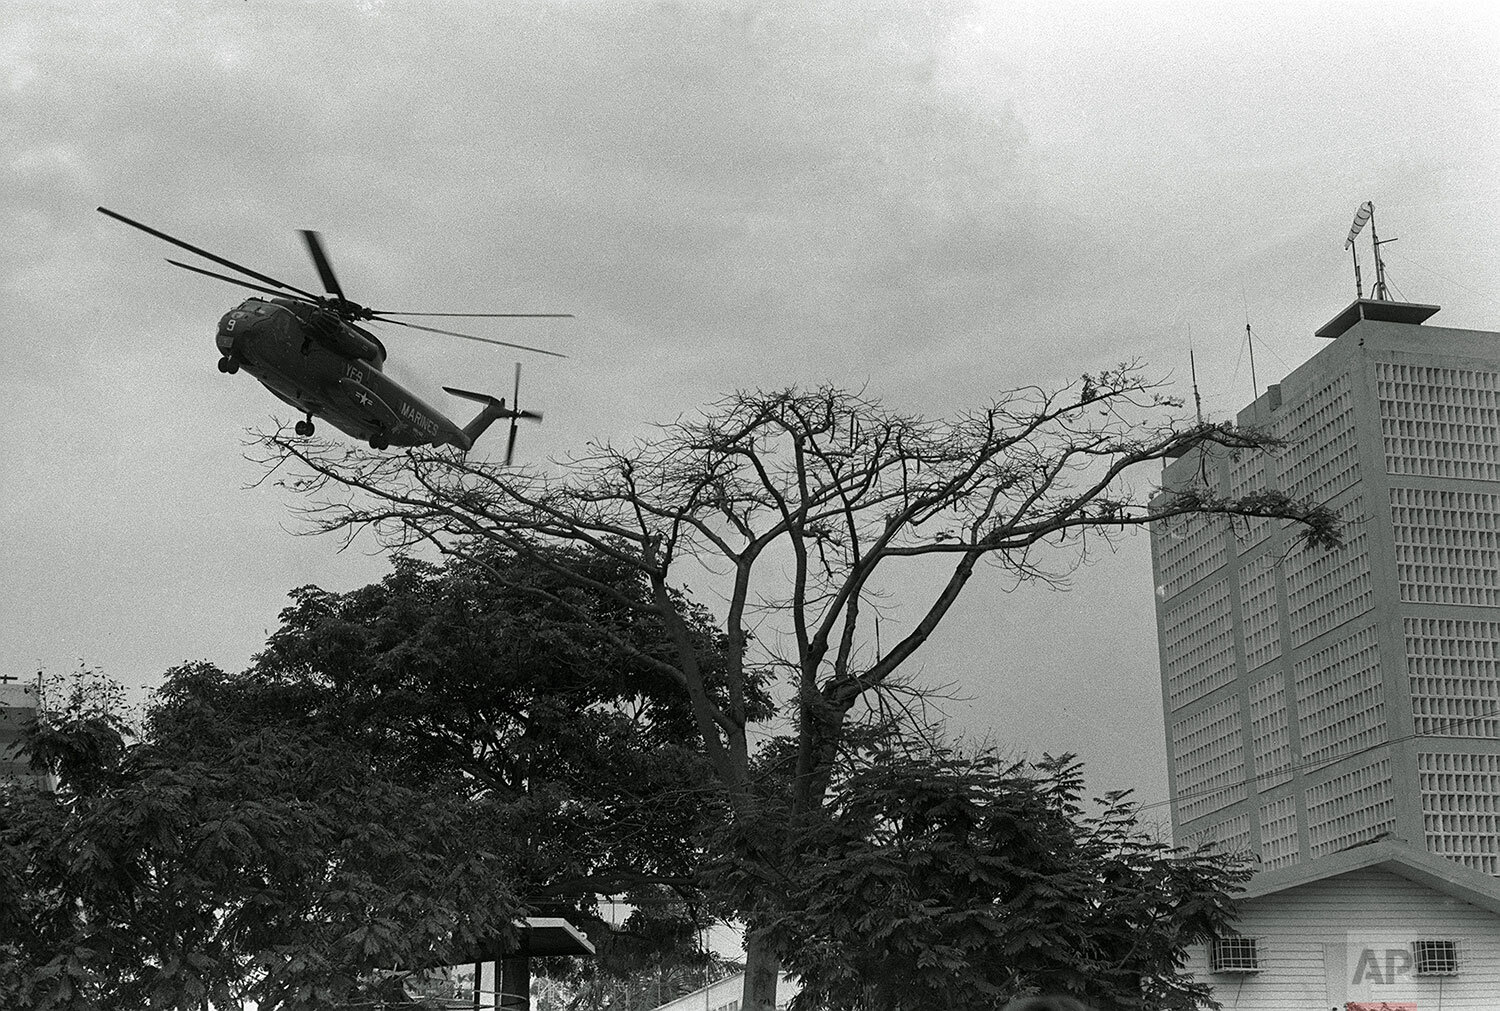  A U.S. Marine helicopter lifts off from the landing pad atop the U.S. Embassy during the evacuation of Saigon Wednesday, April 30, 1975. (AP Photo/phu) 